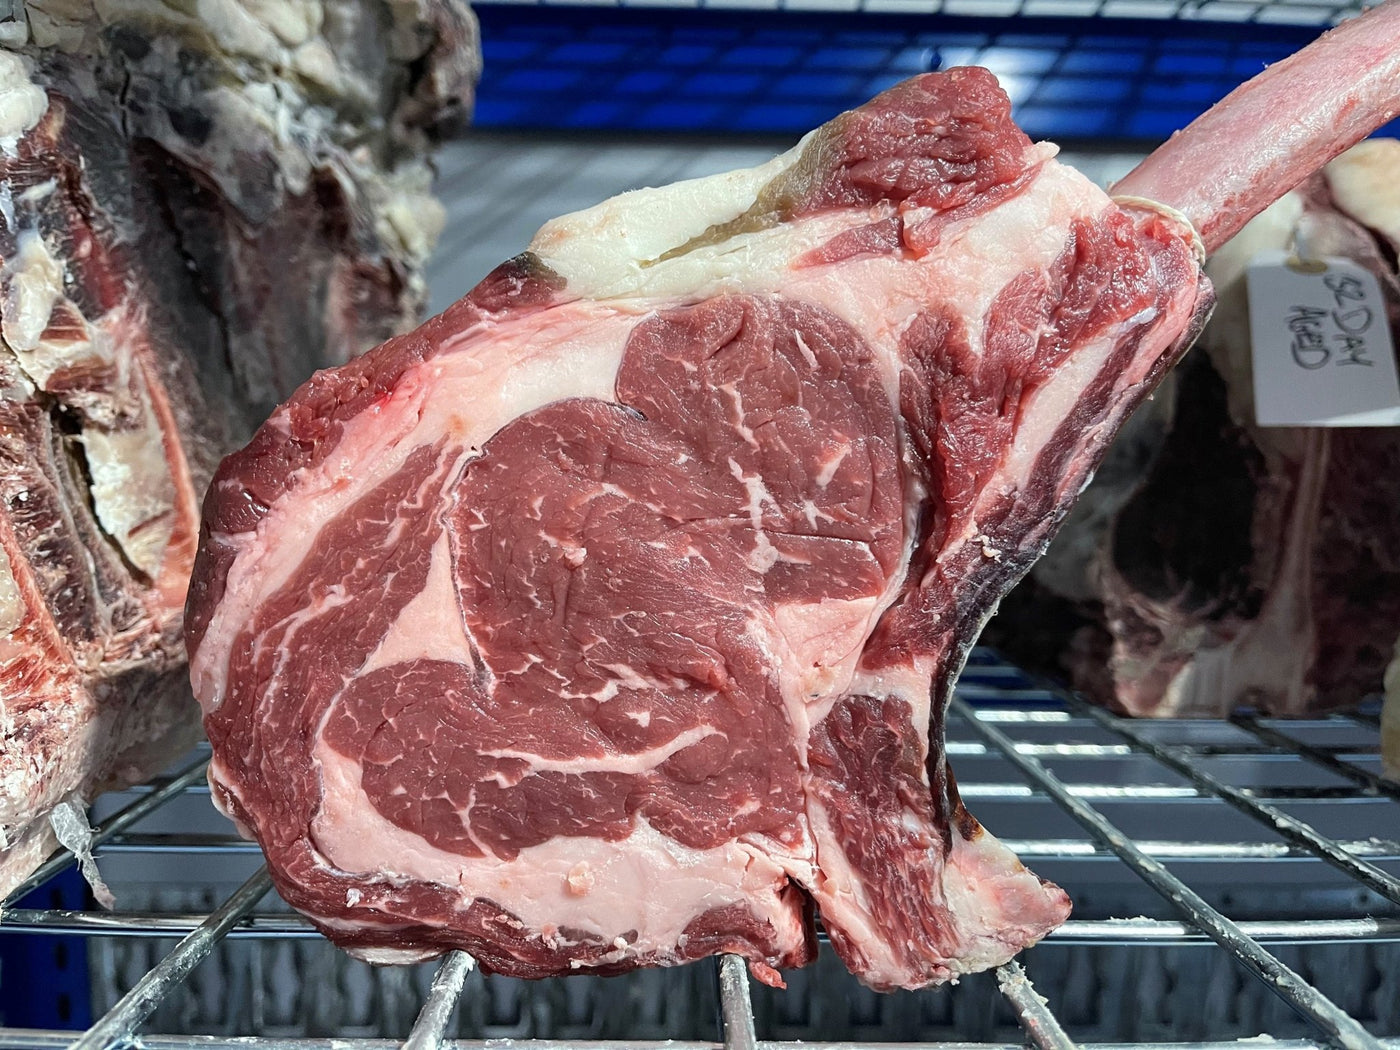 75 Day Dry-Aged Aberdeen Angus Tomahawk - Thomas Joseph Butchery - Ethical Dry-Aged Meat The Best Steak UK Thomas Joseph Butchery